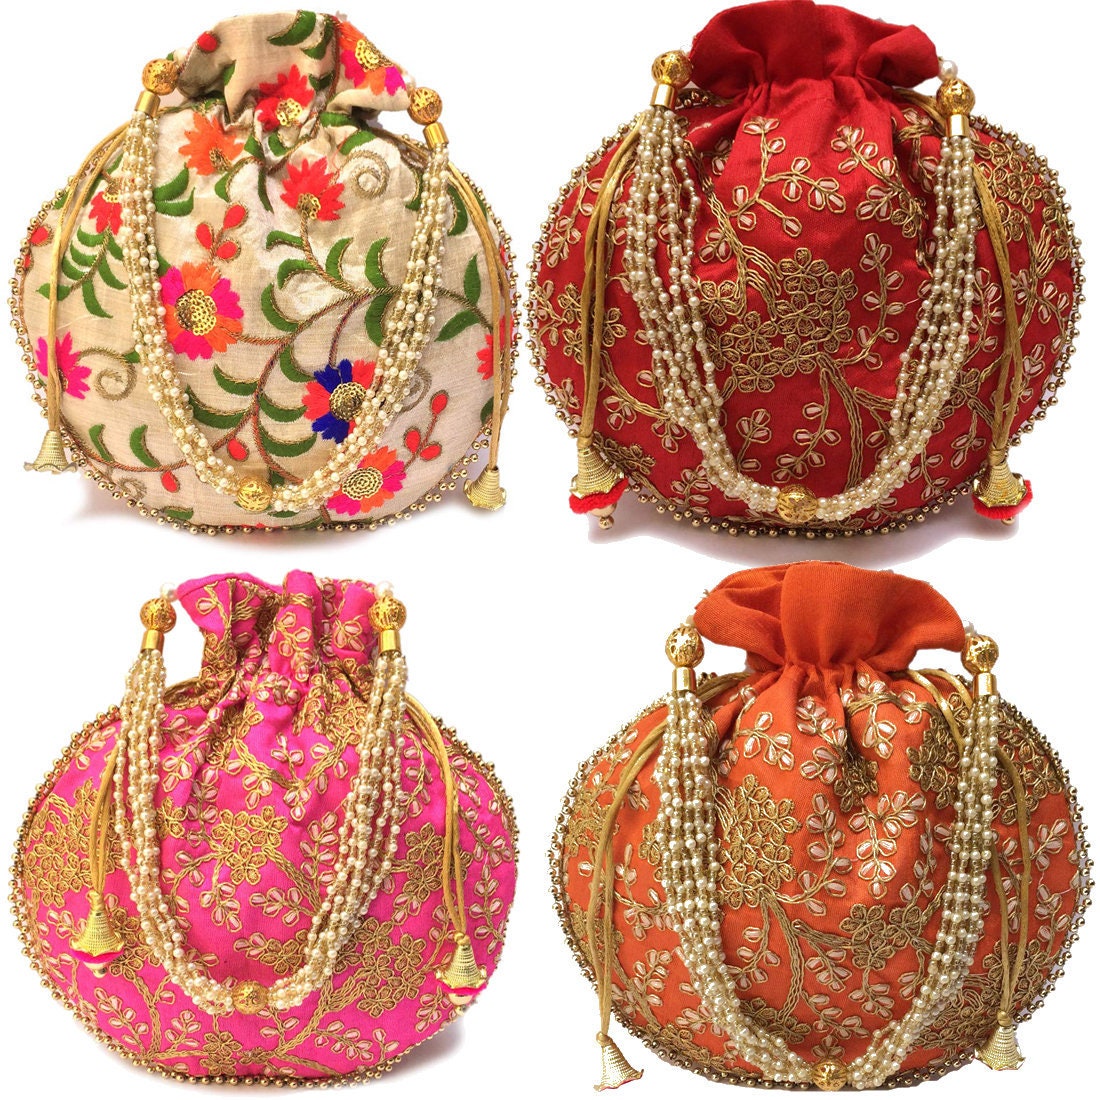 Colorful Indian Designer Women Handmade Embroidery Ladies Purse Bag New